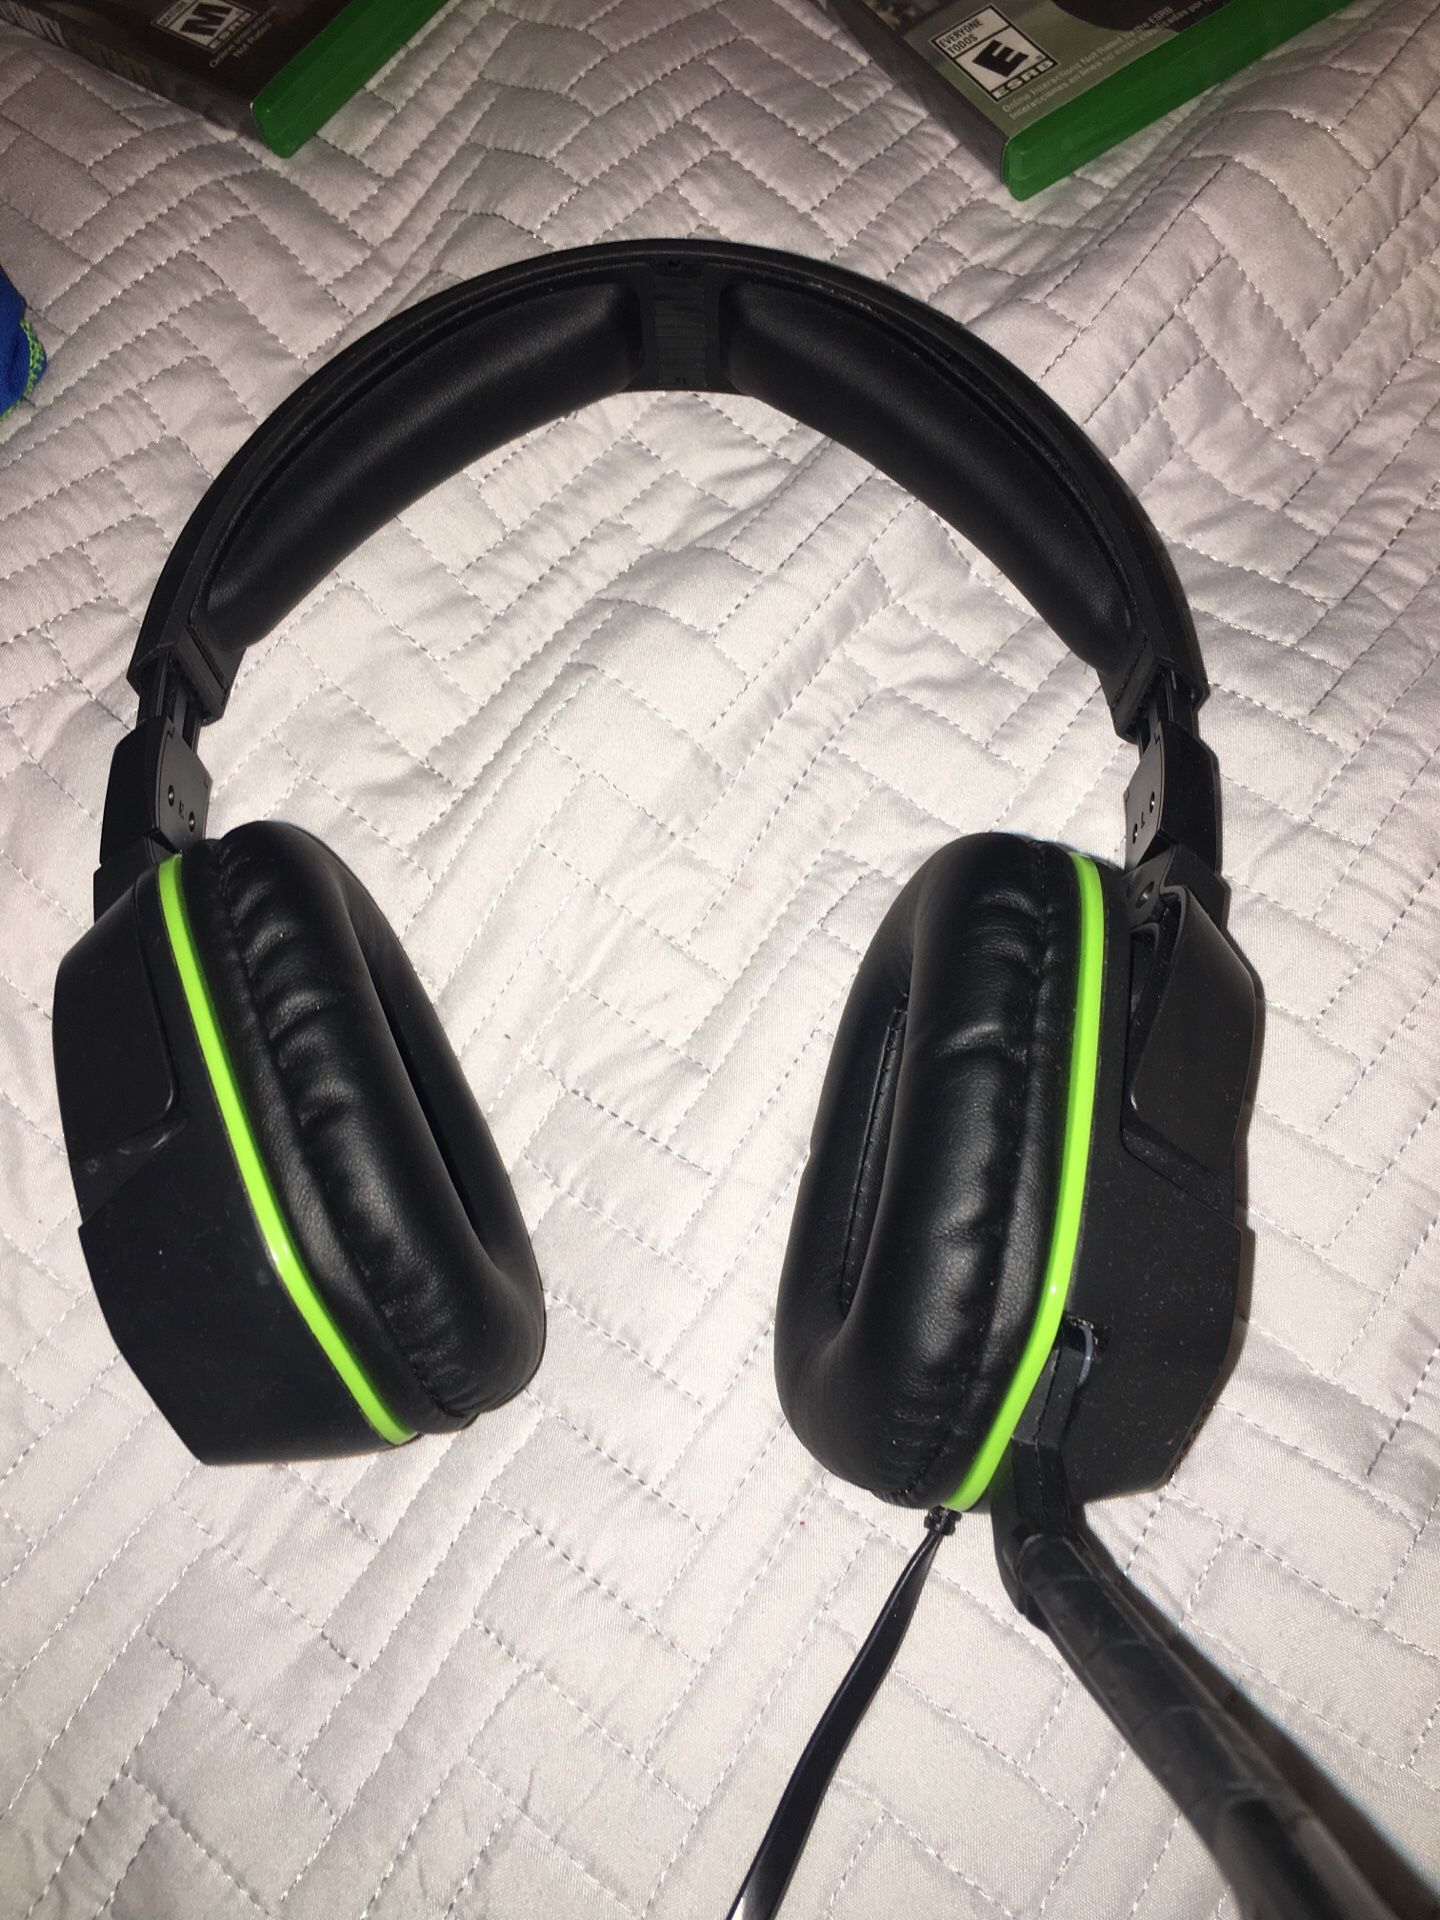 After glow headset